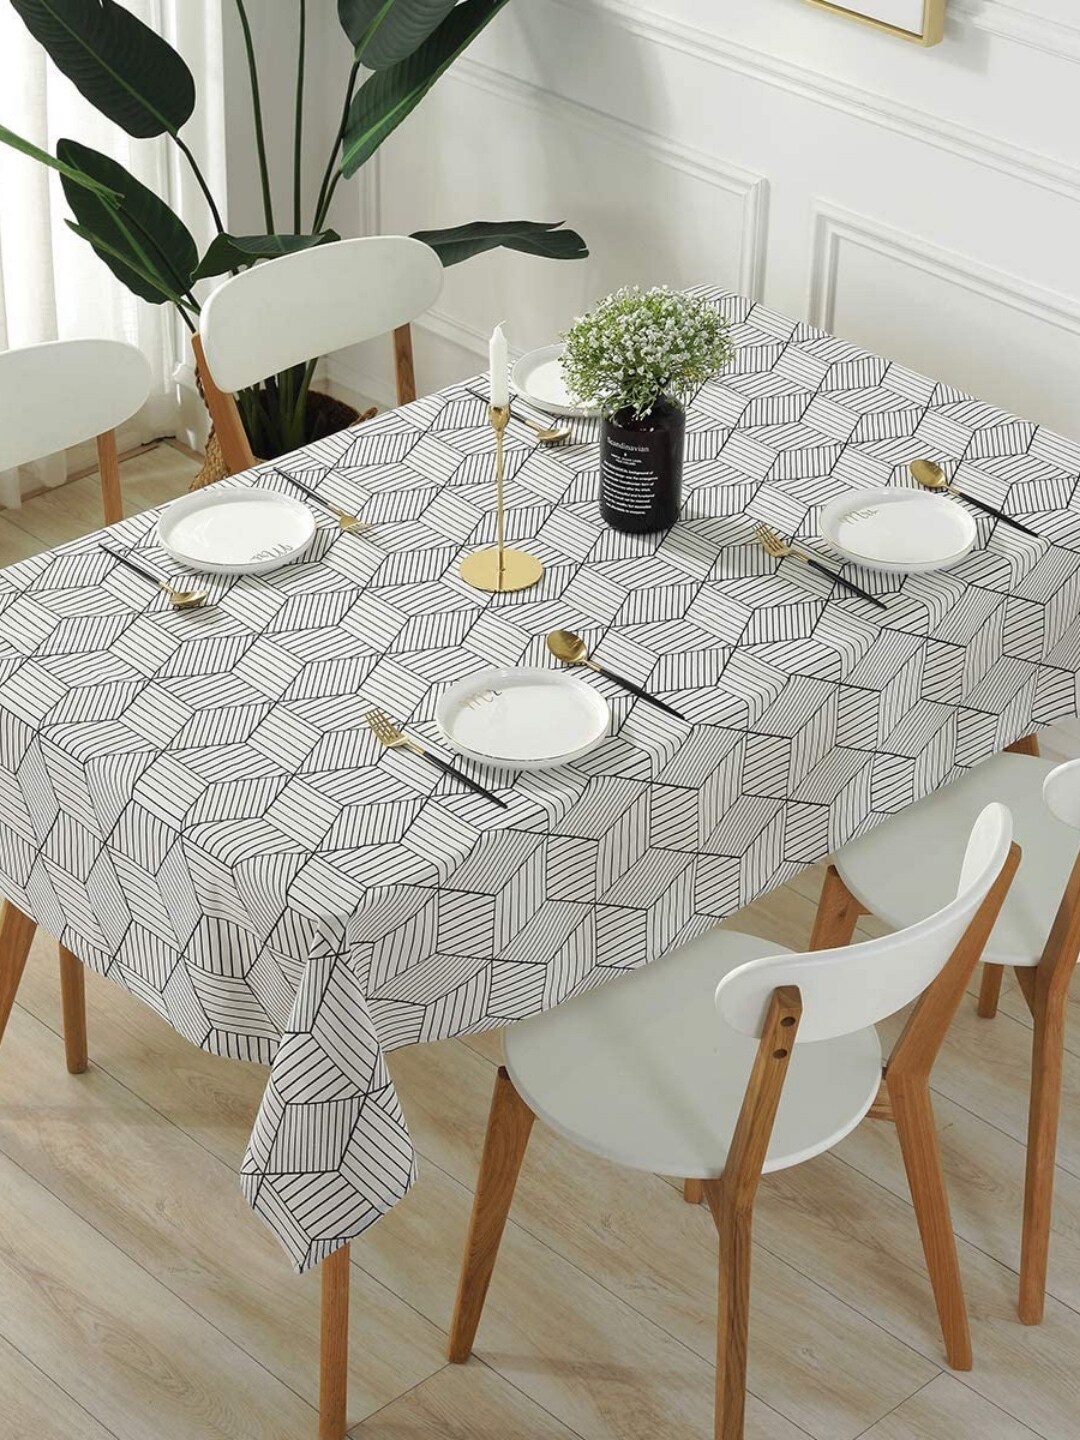 MODERN HOMES Black   White Hand Printed Cotton 4 6 Seater Rectangular Table Cover